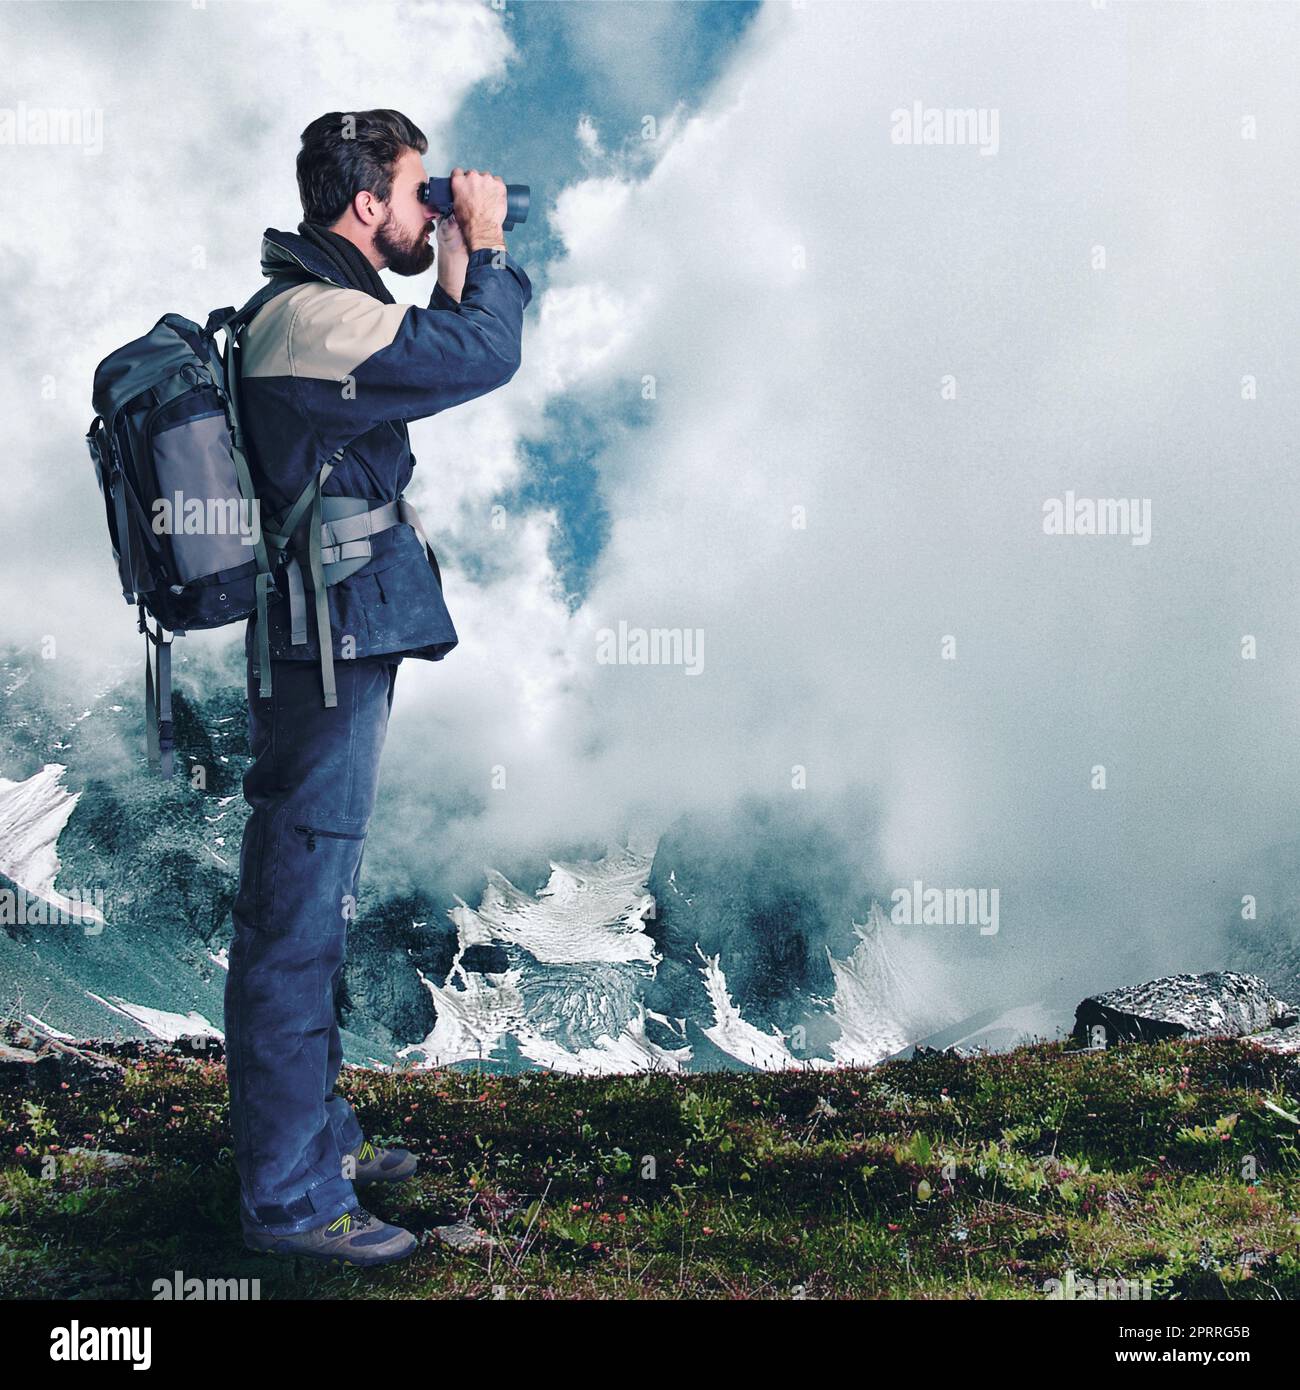 Searching for new challenges. hiker looking through binoculars in a remote landscape. Stock Photo